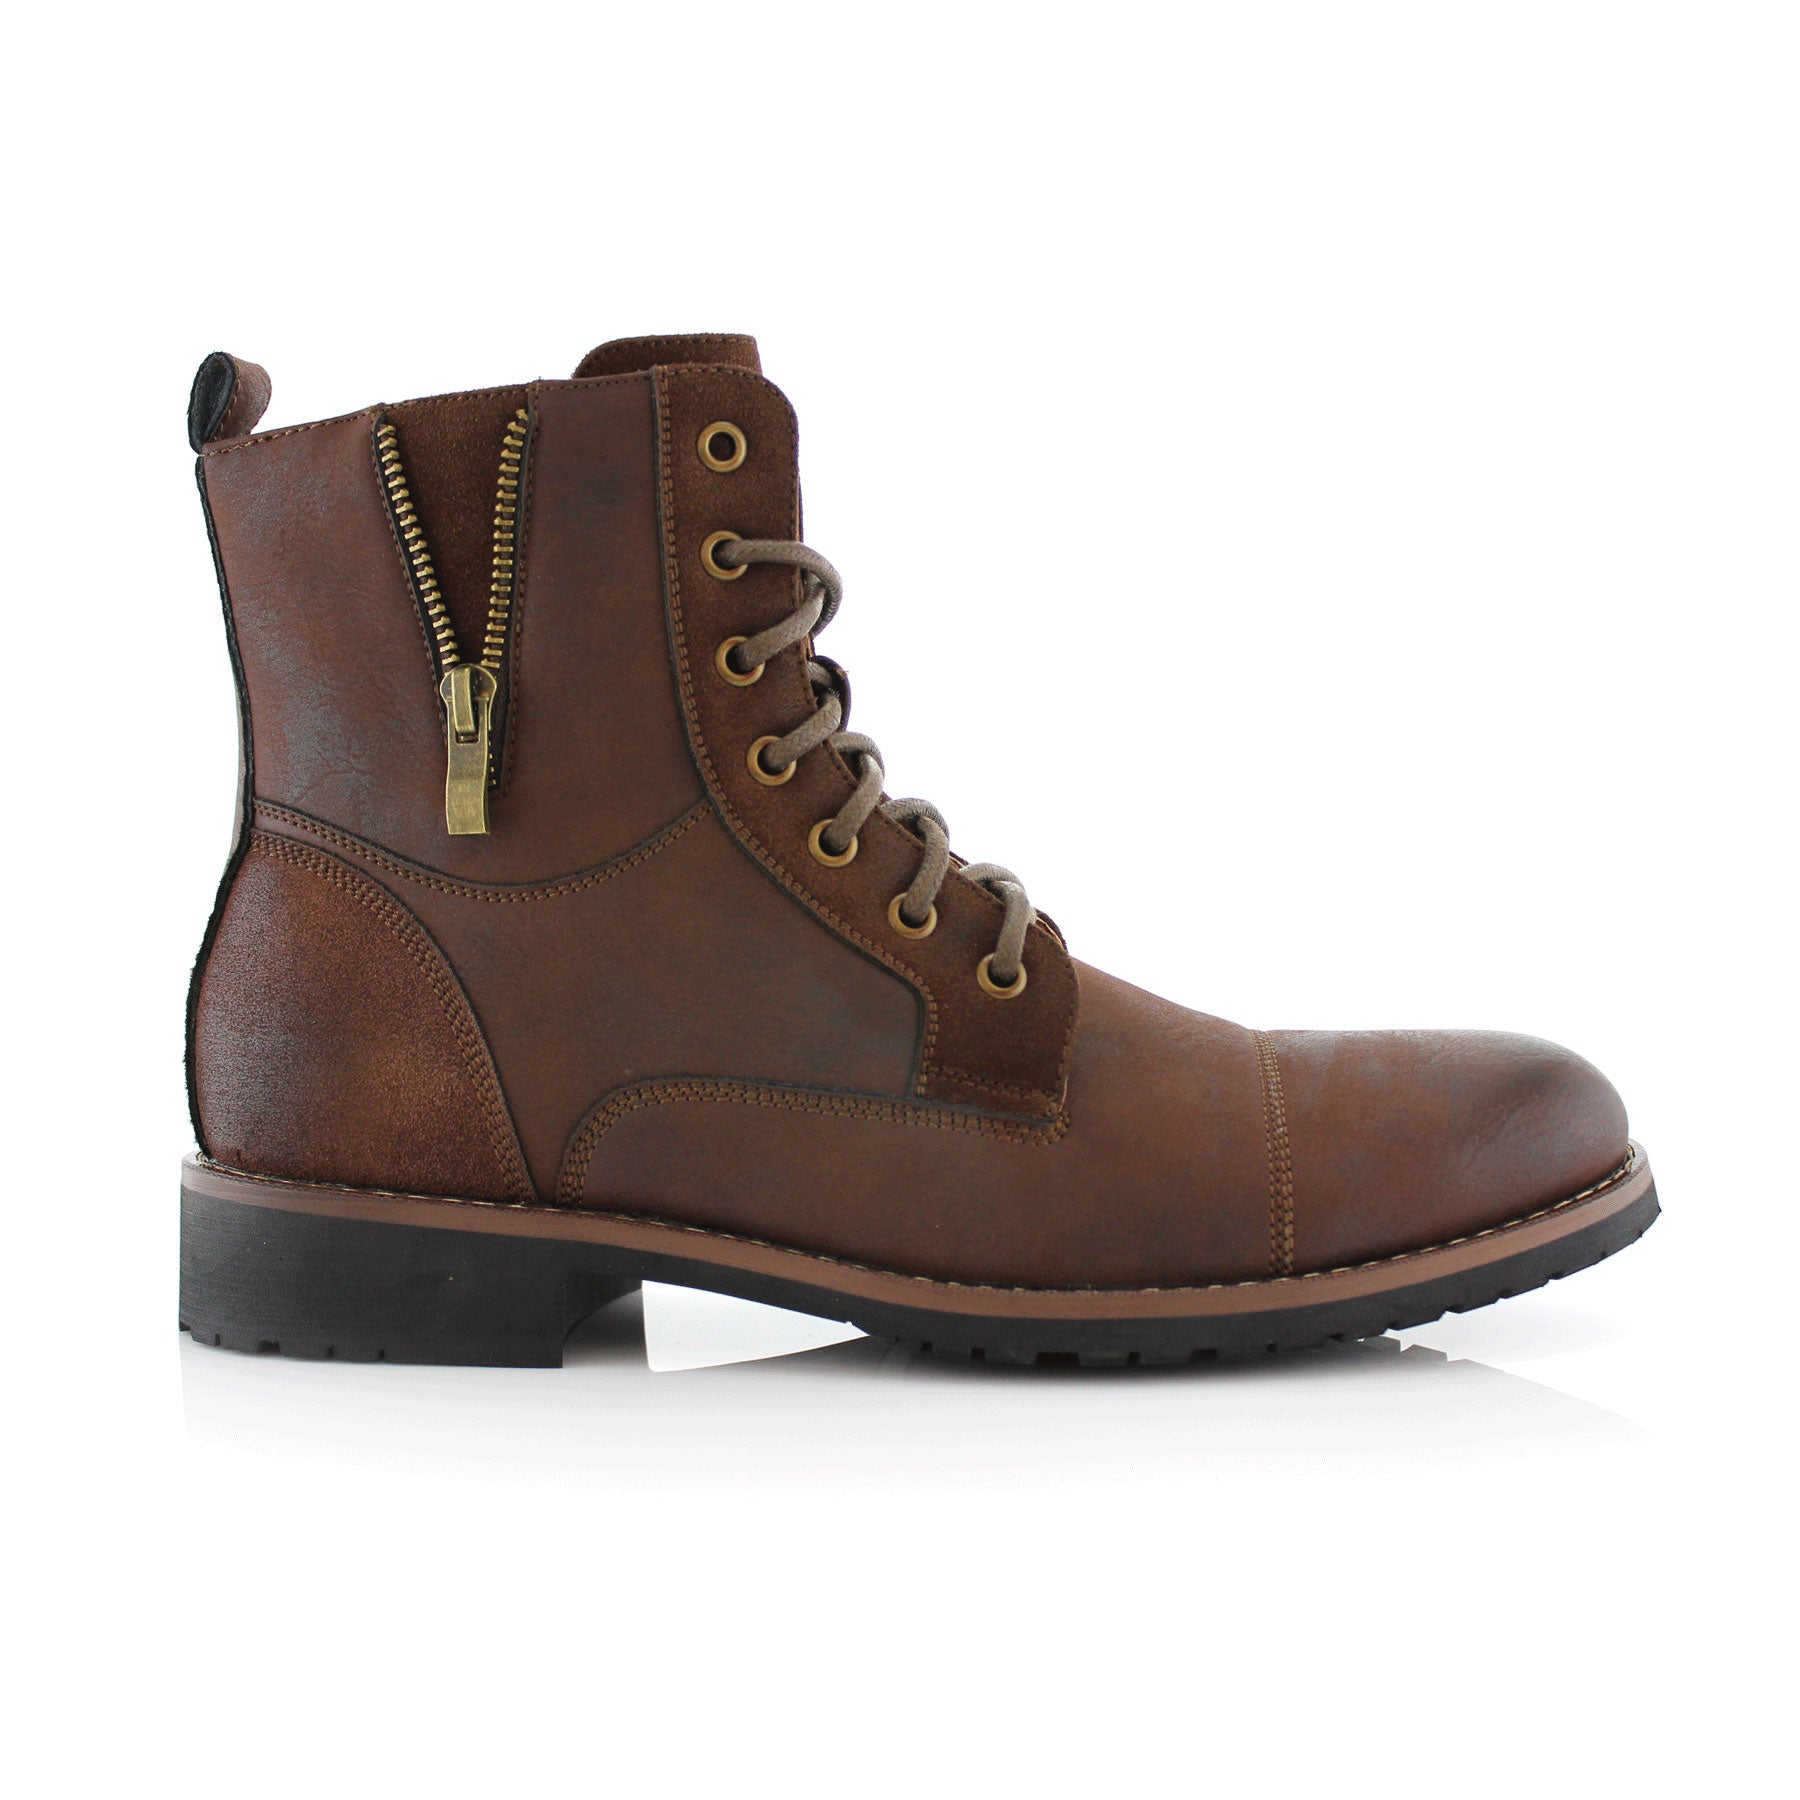 Duo-Textured Cap-Toe Boots | Reid by Ferro Aldo | Conal Footwear | Outer Side Angle View